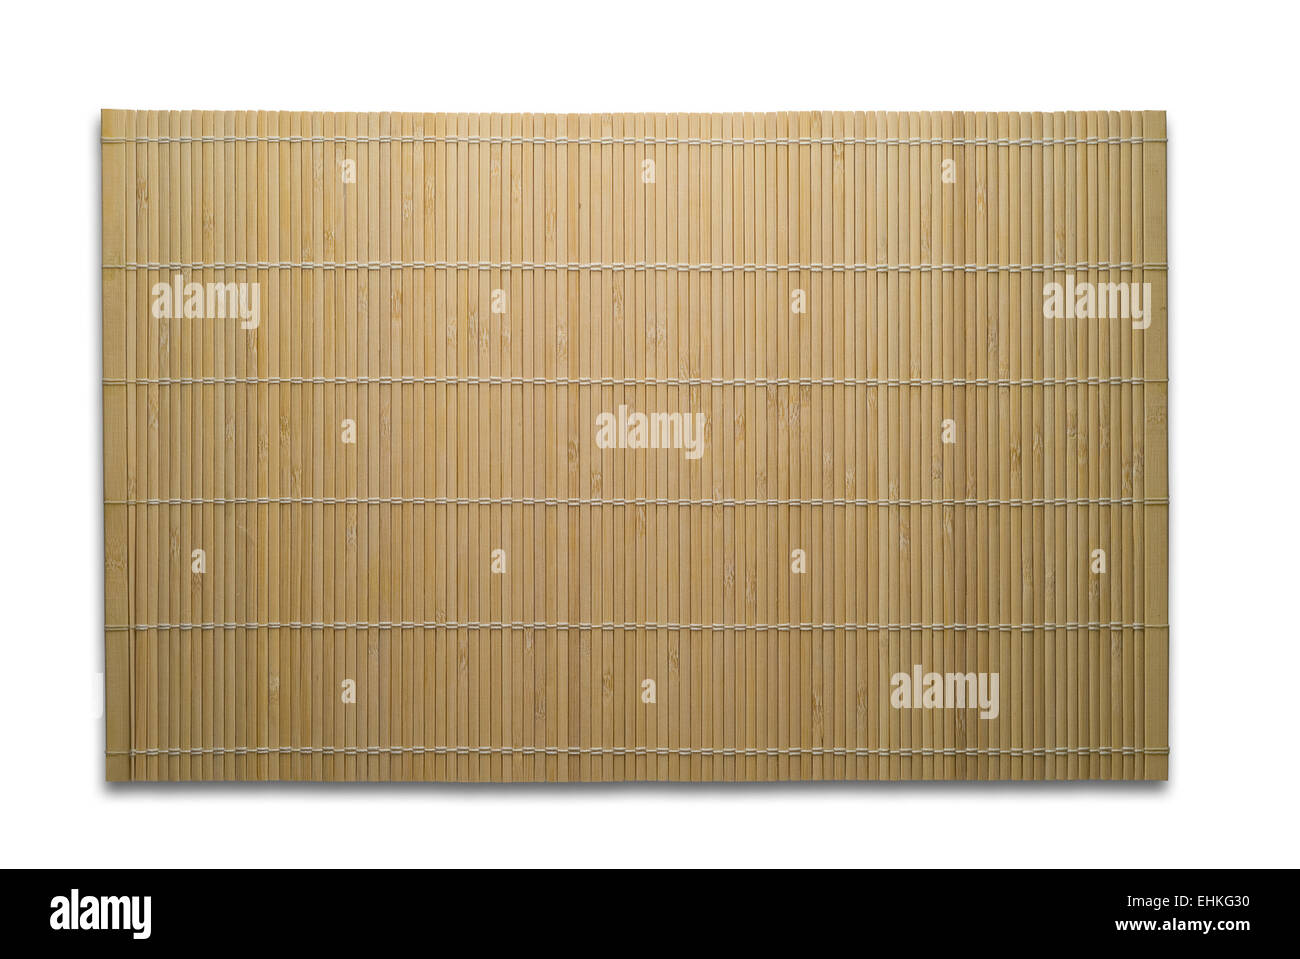 Bamboo mat with clipping path background Stock Photo